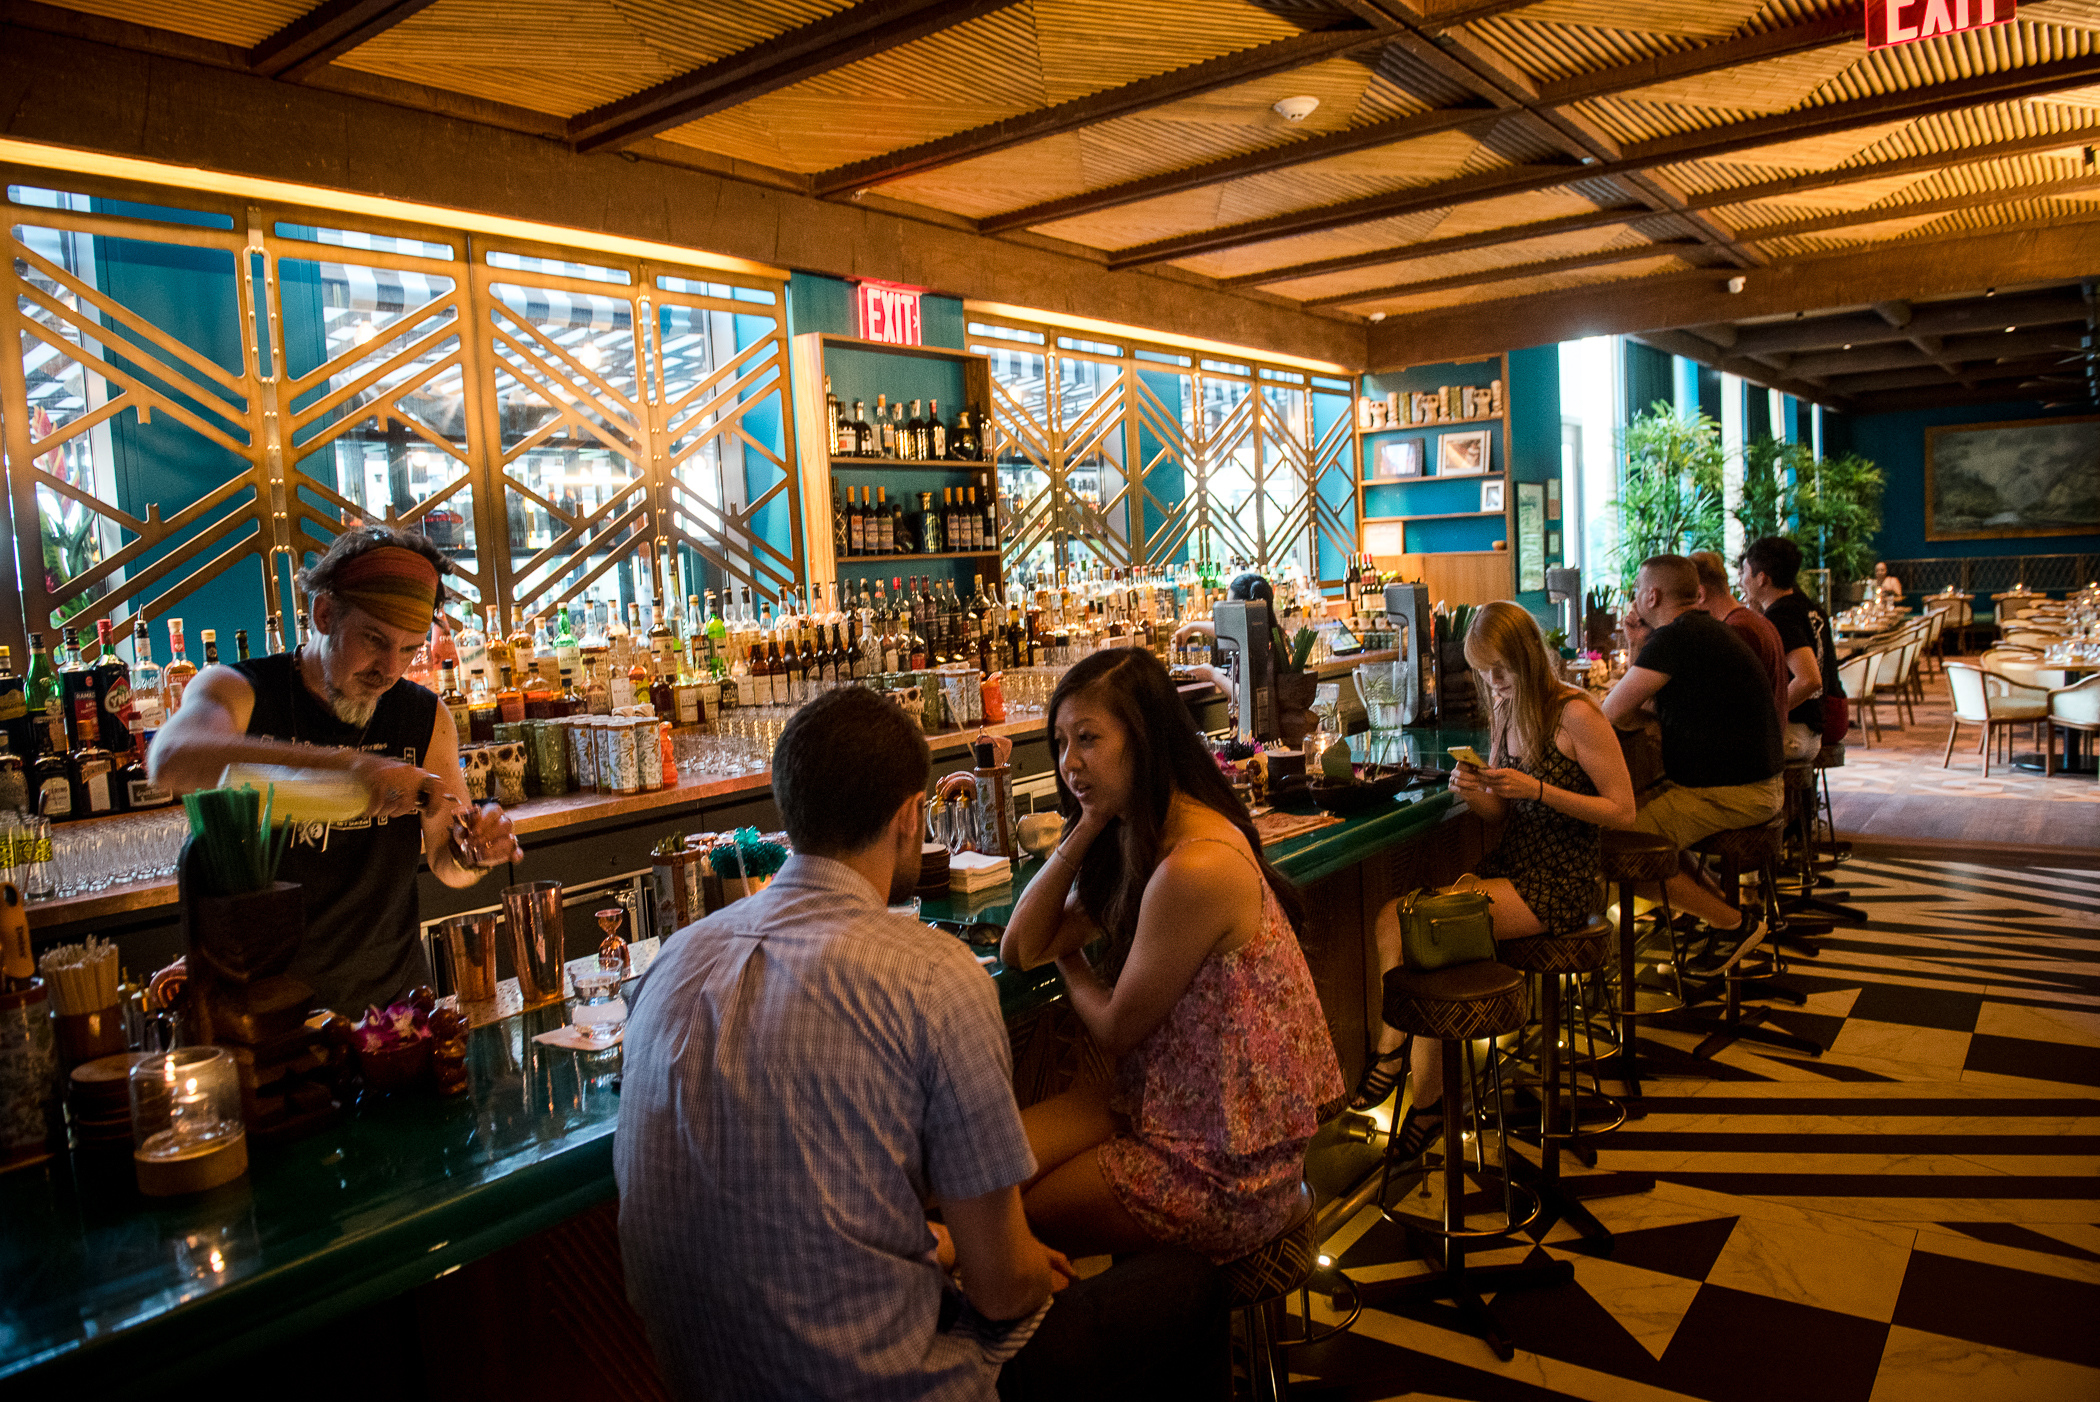 10 Of The Best Bars In Hells Kitchen To Visit